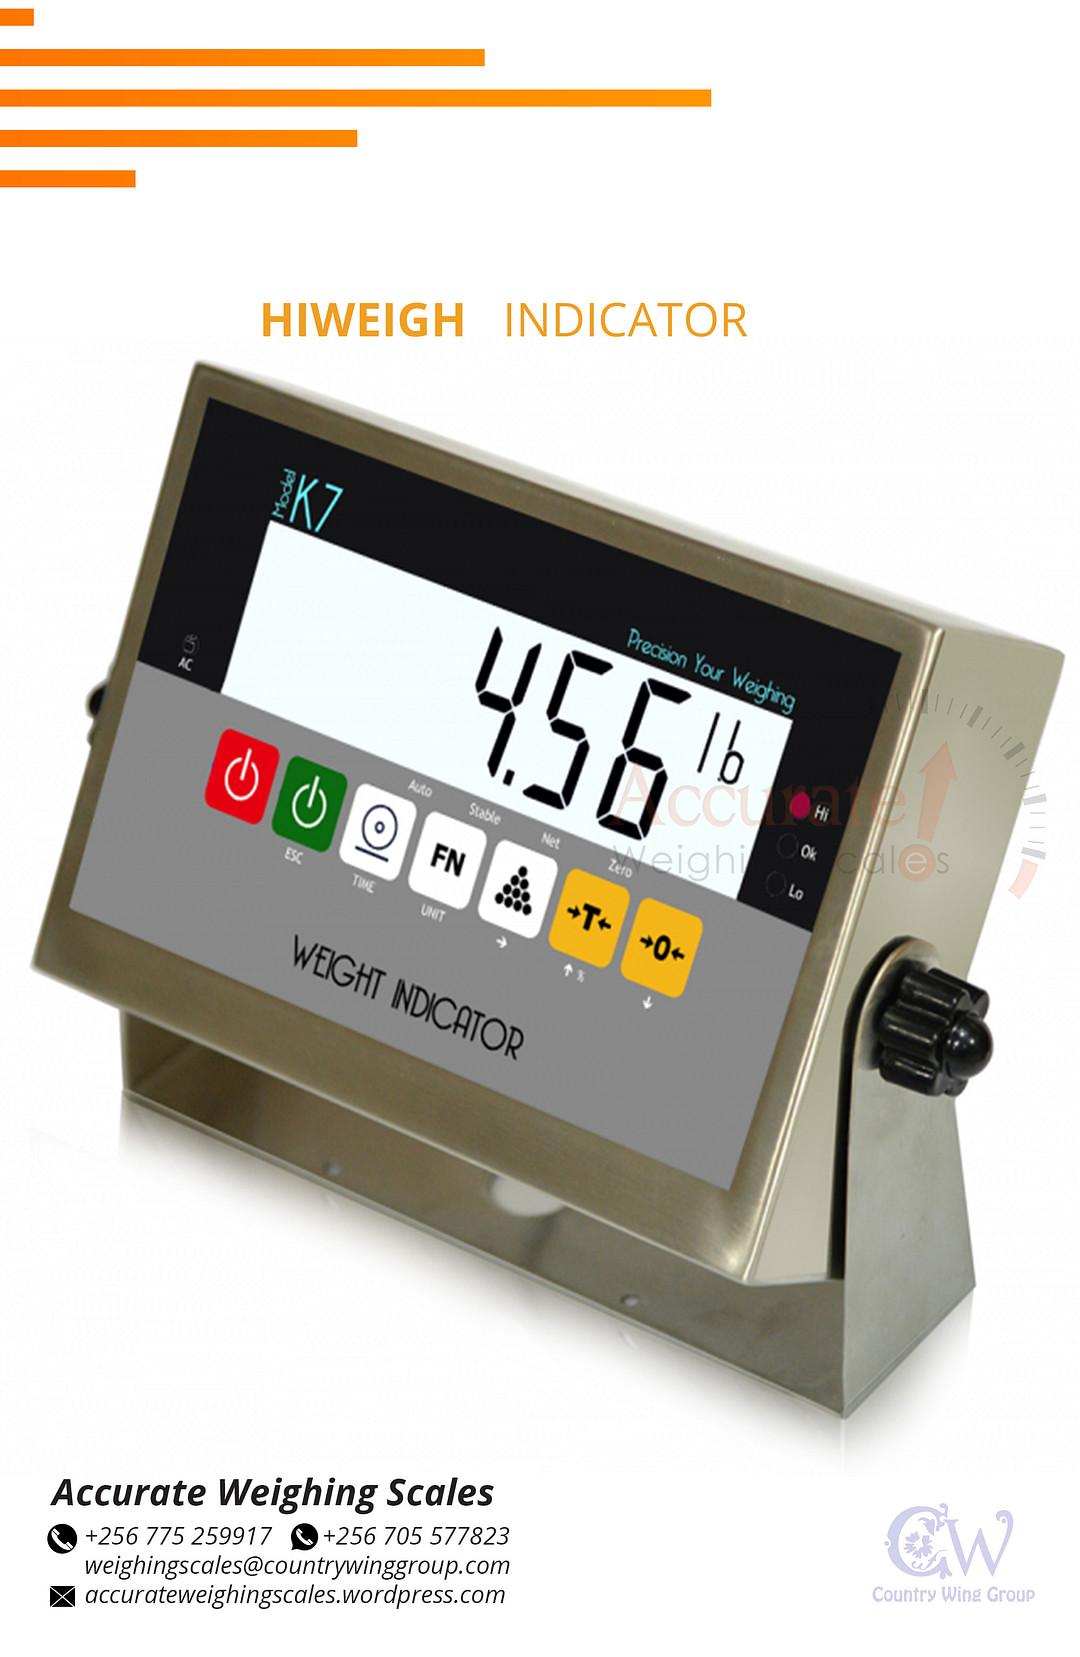 Weighing Scale Indicators cover